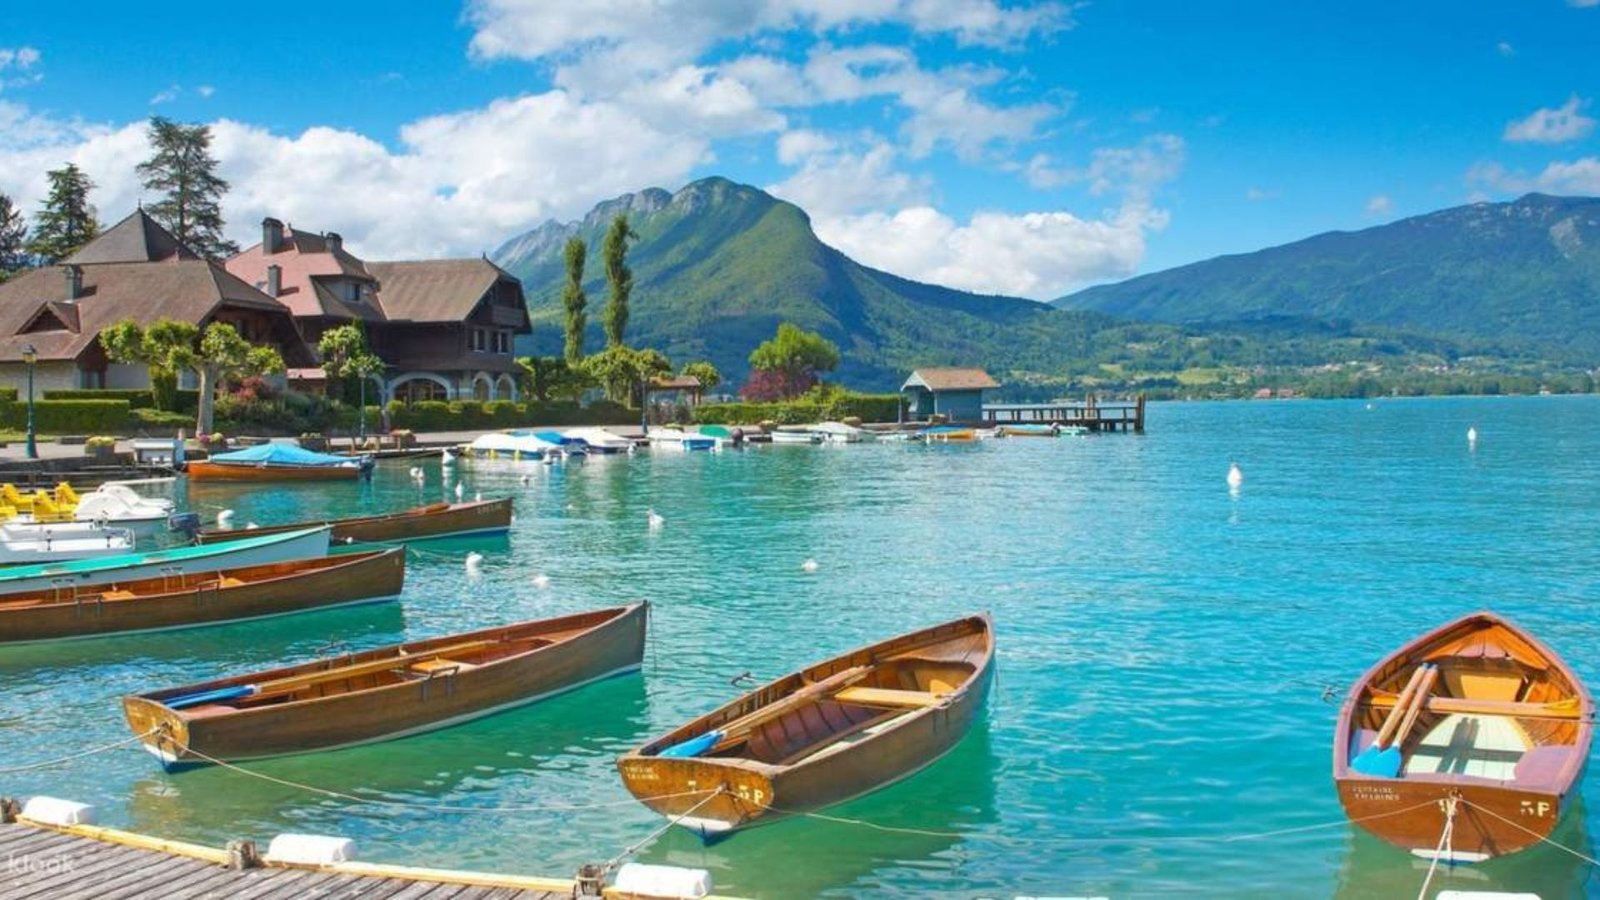 A Boat in Lake Annecy